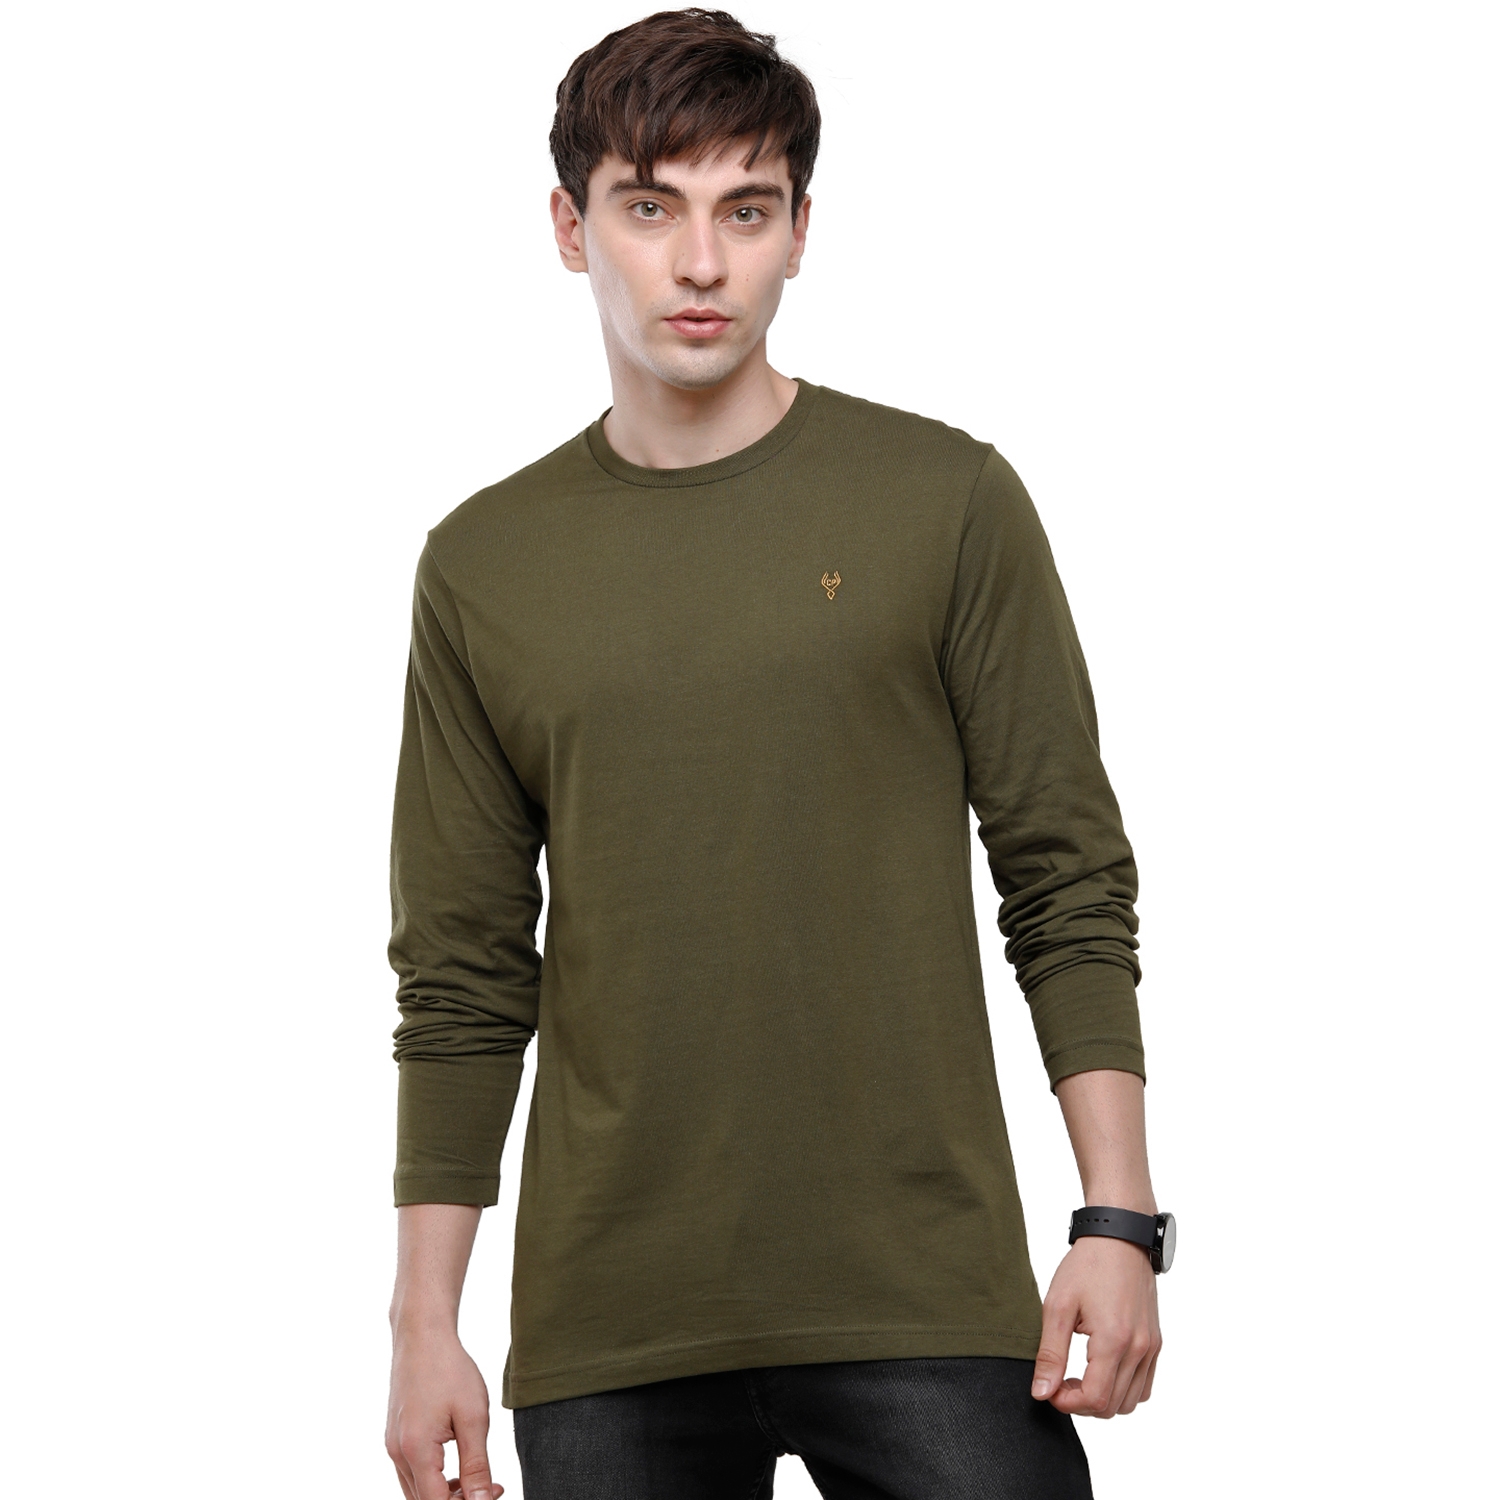 Classic Polo | Classic Polo Mens 100% Cotton Solid Full Sleeve Round Neck T-Shirt - Green (NOS-COMET-FS-05 SF C)